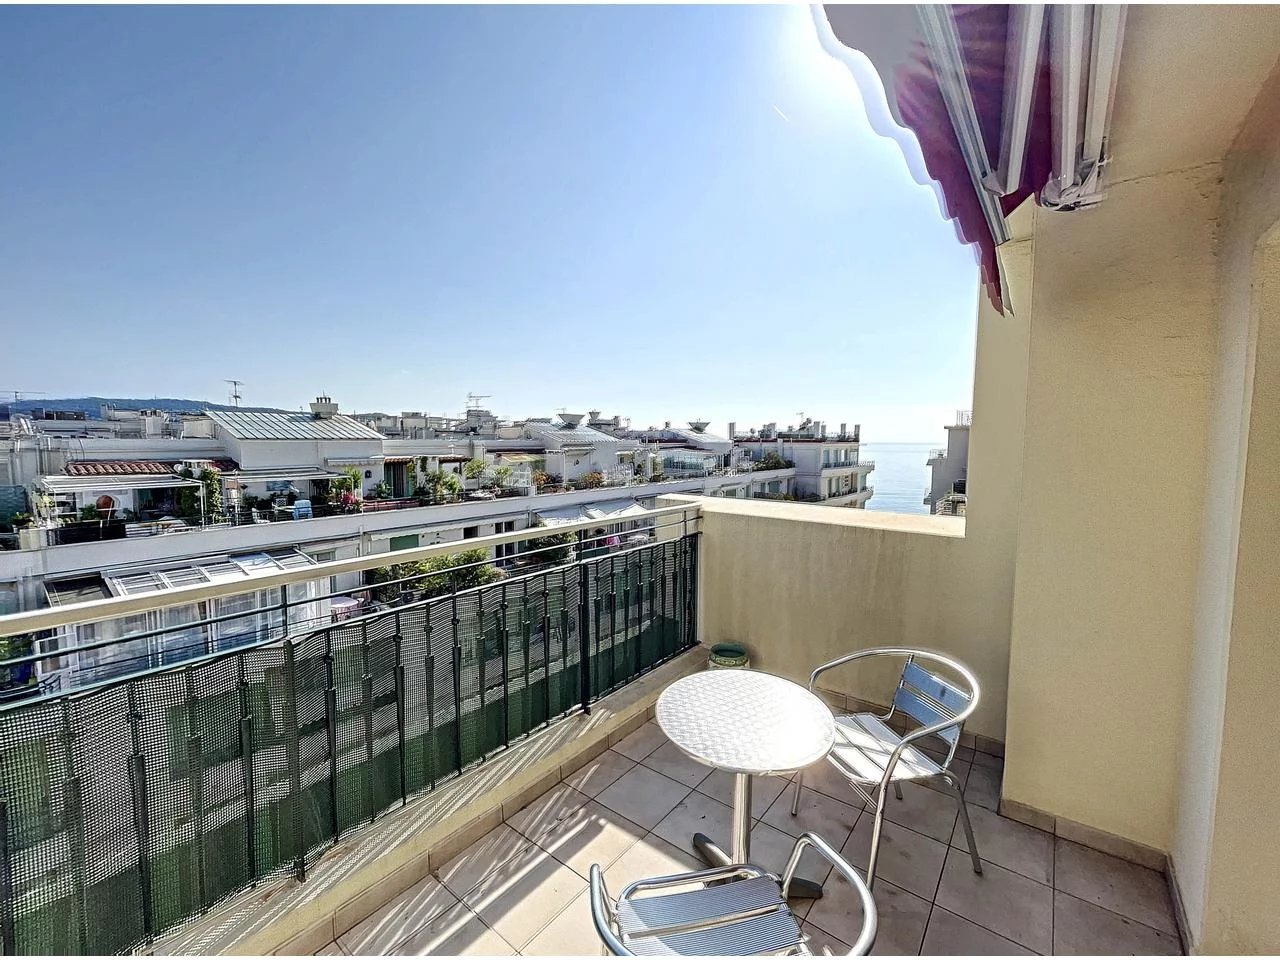 Appartement  4 Rooms 156m2  for sale  2 180 000 €